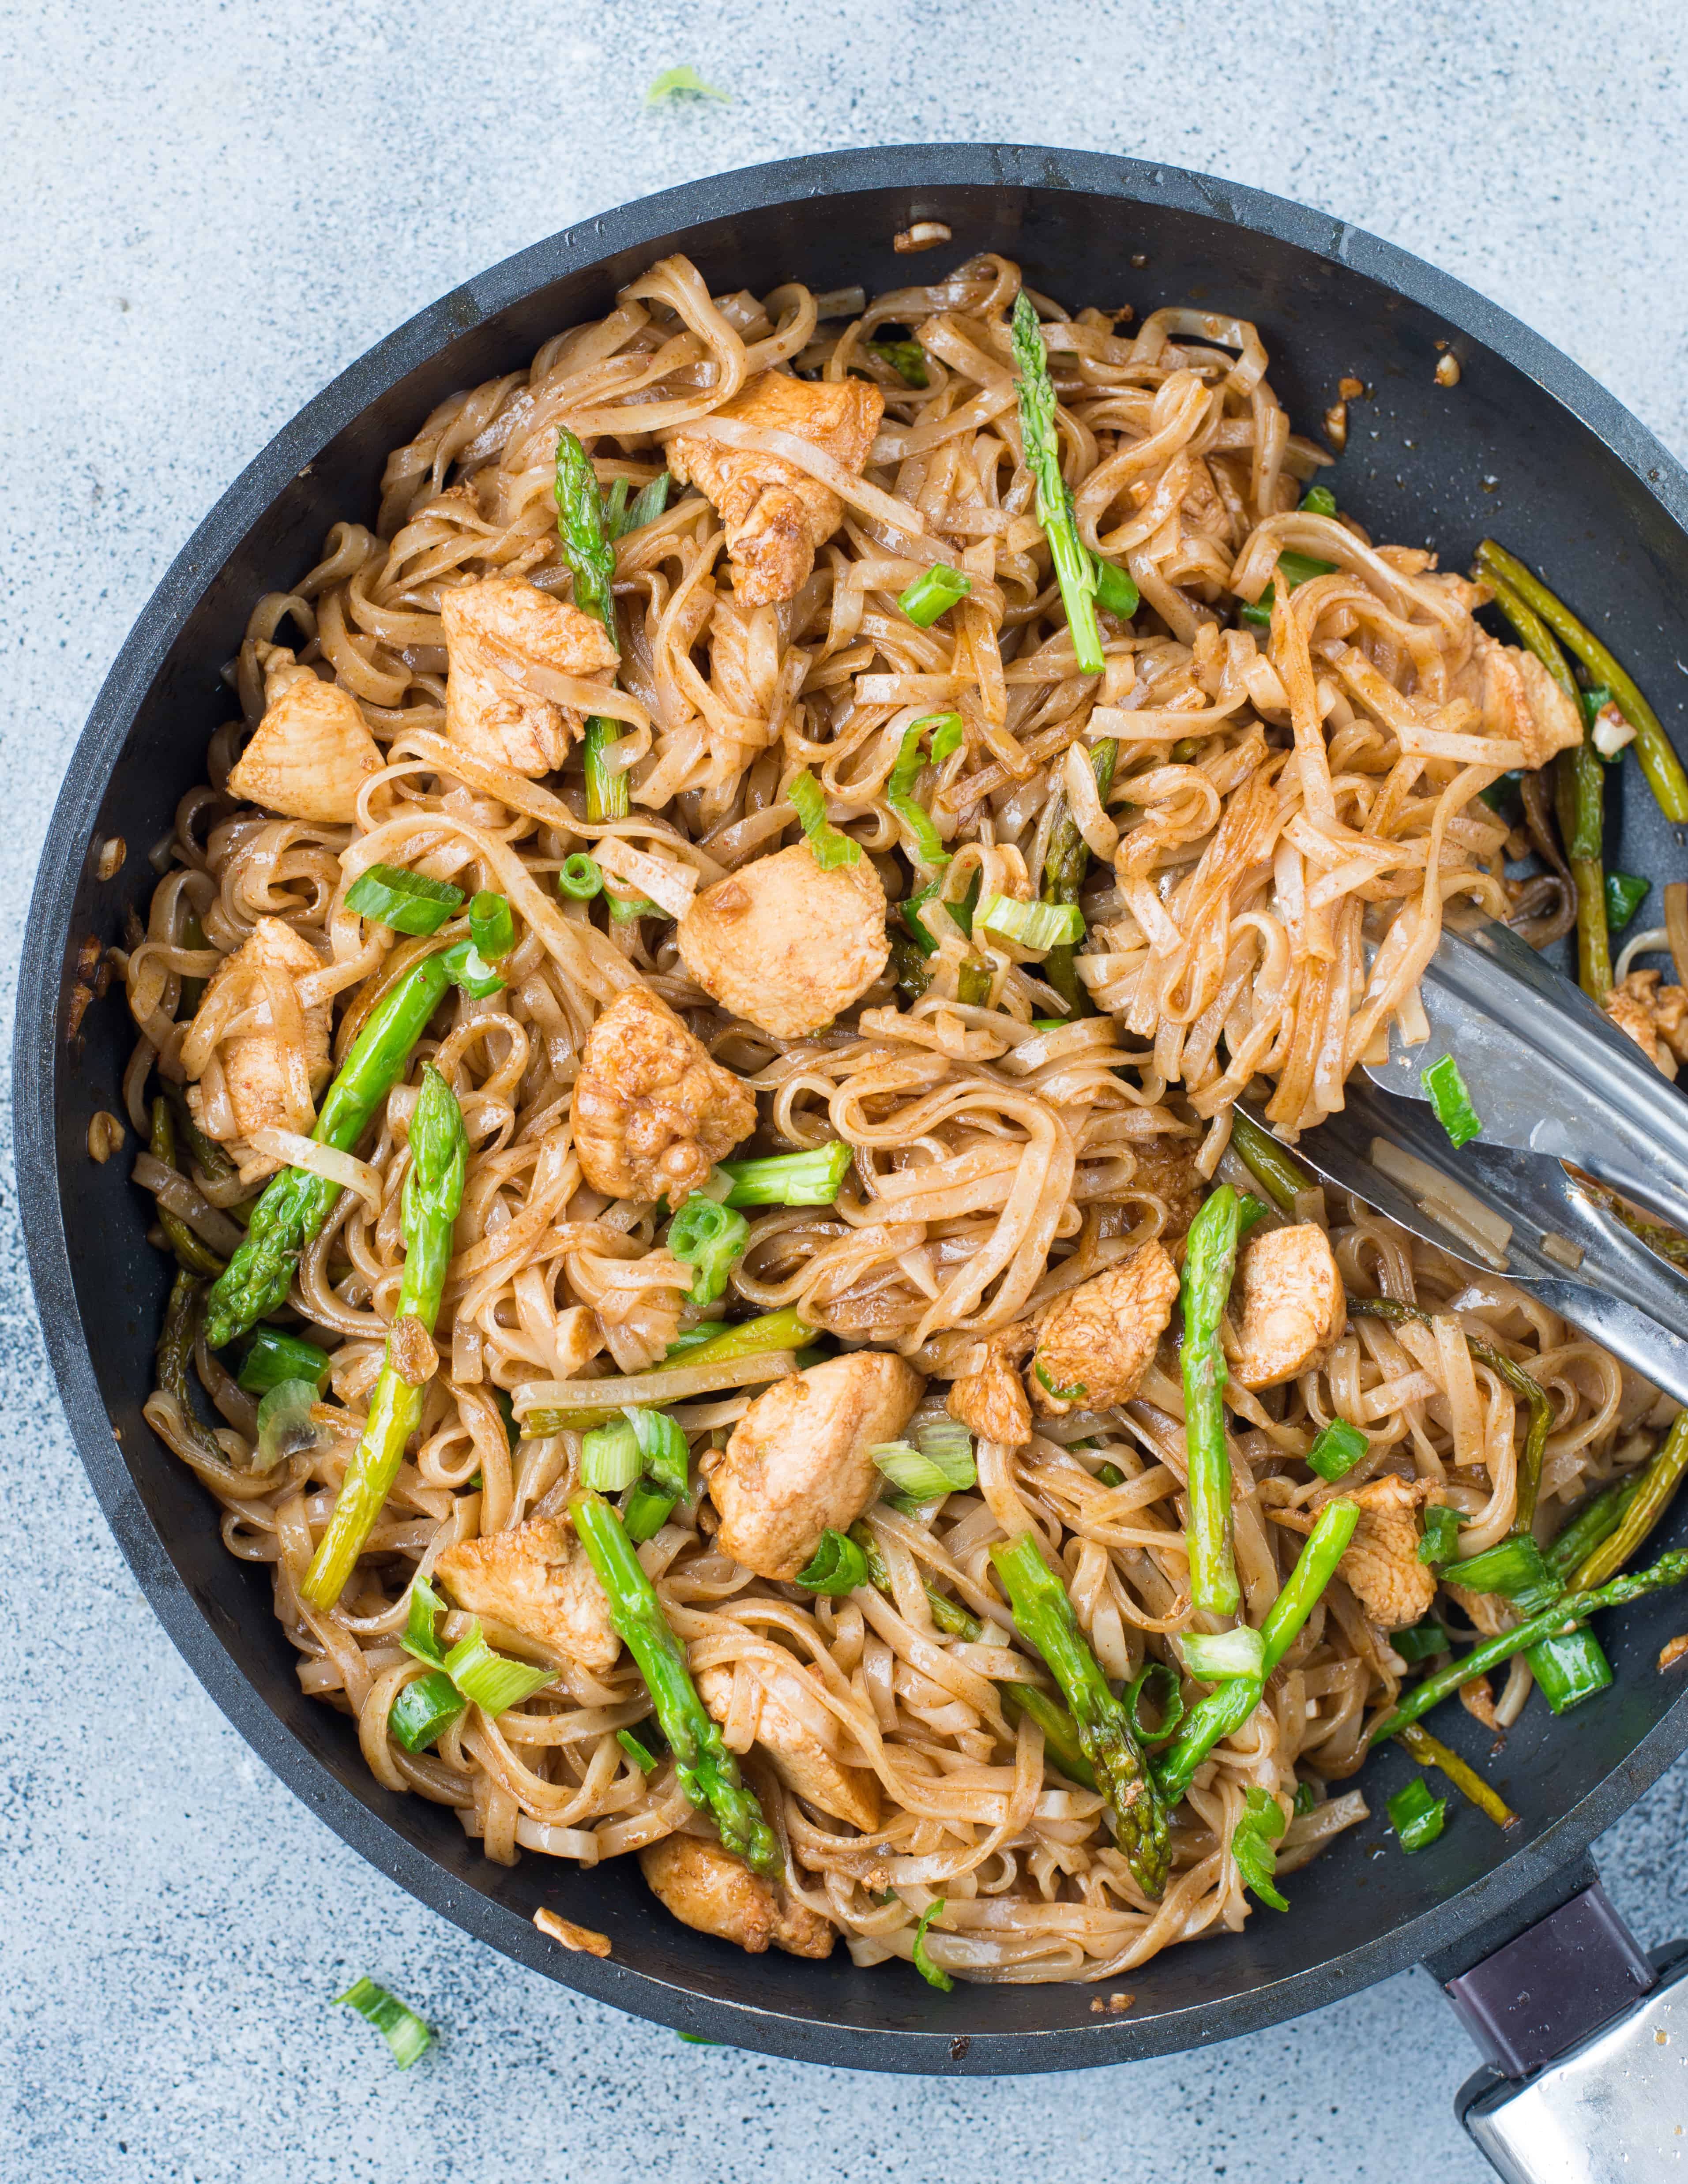 This Saucy Chicken Asparagus Stir fry Noodles with succulent pieces of chicken and crunchy asparagus is bursting with Asian flavors. This 30-minute Rice Noodles Stir Fry is going to be a perfect weeknight dinner.